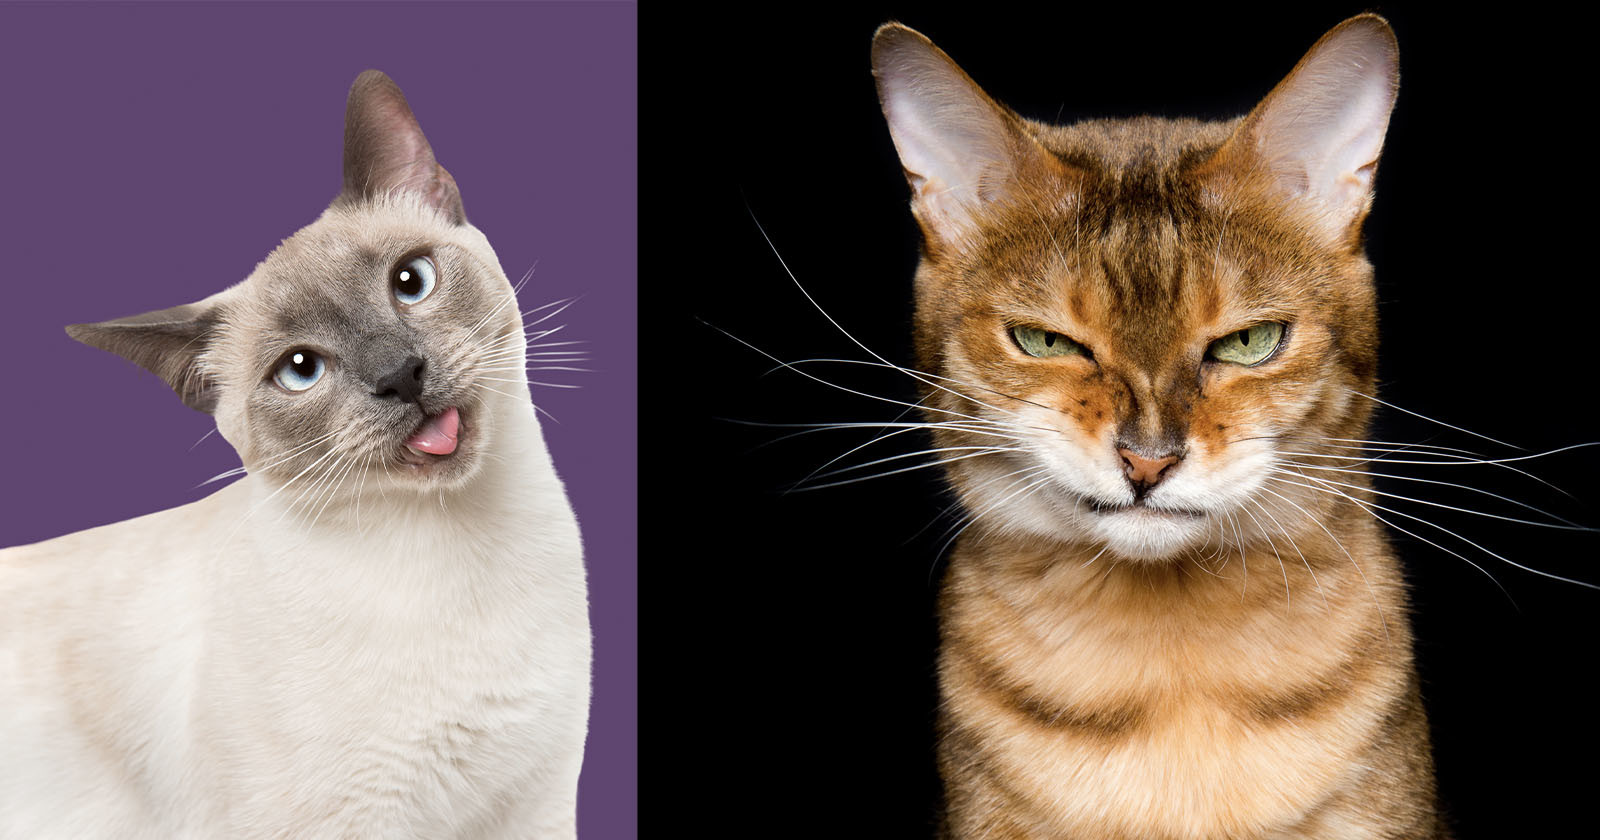  photographer captures many humorous expressions cats 